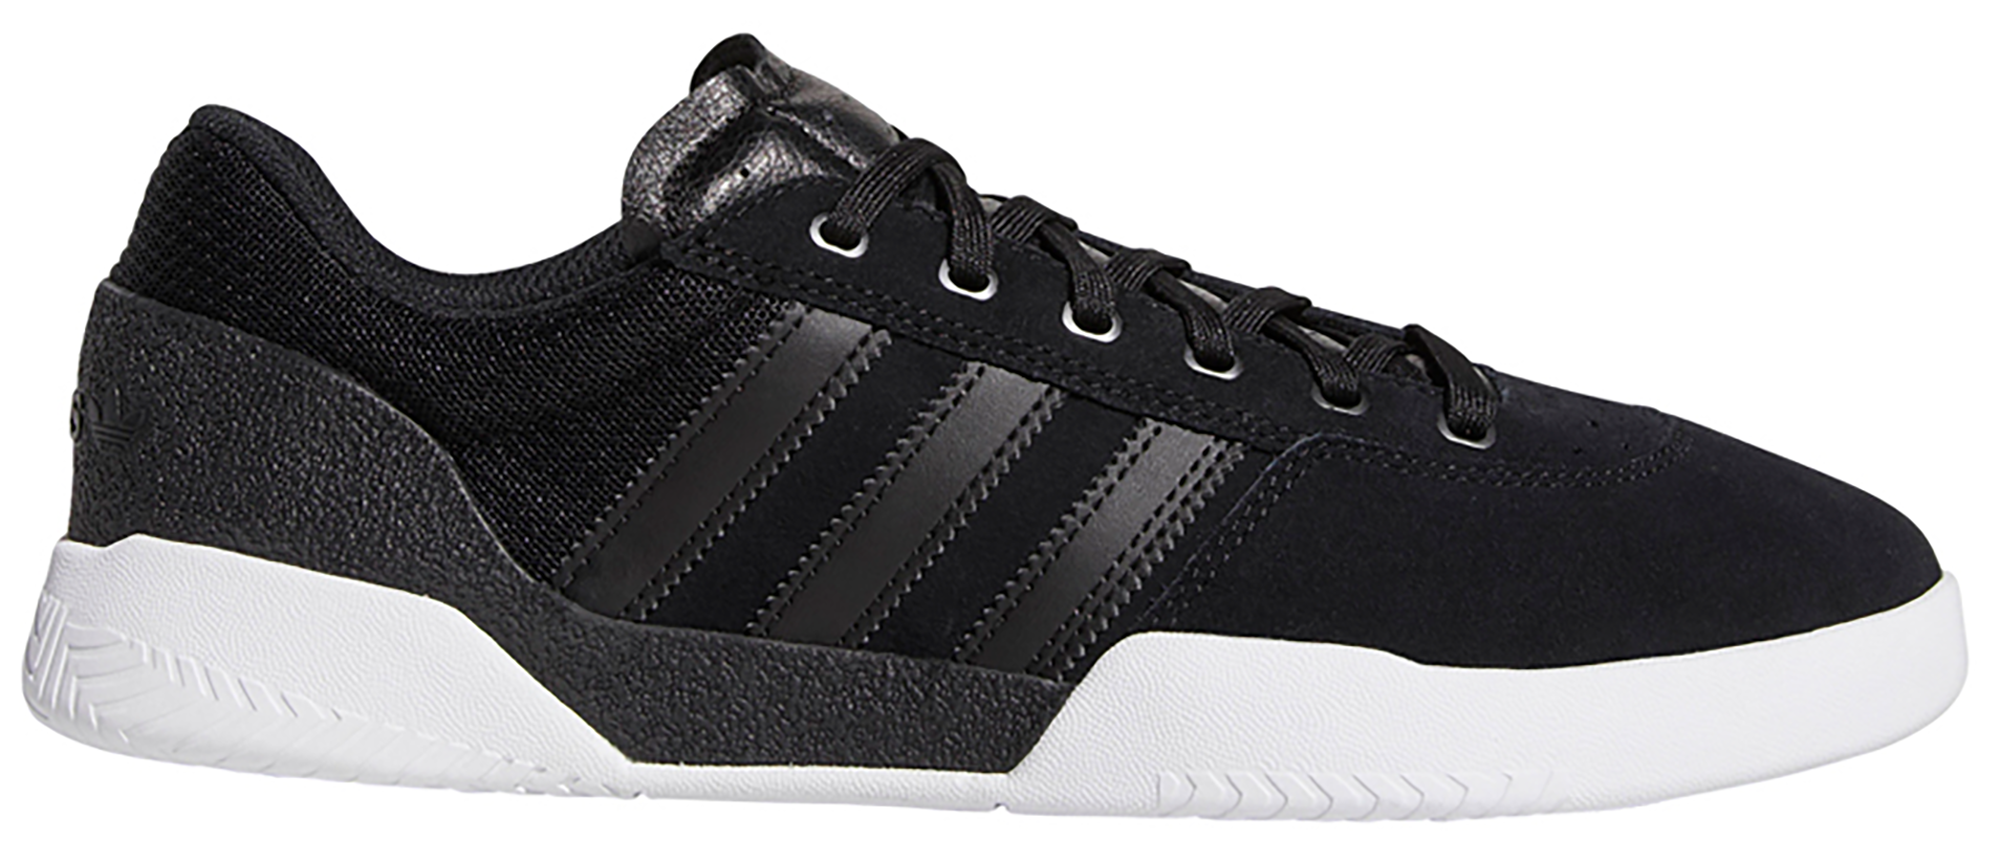 adidas city cup all black